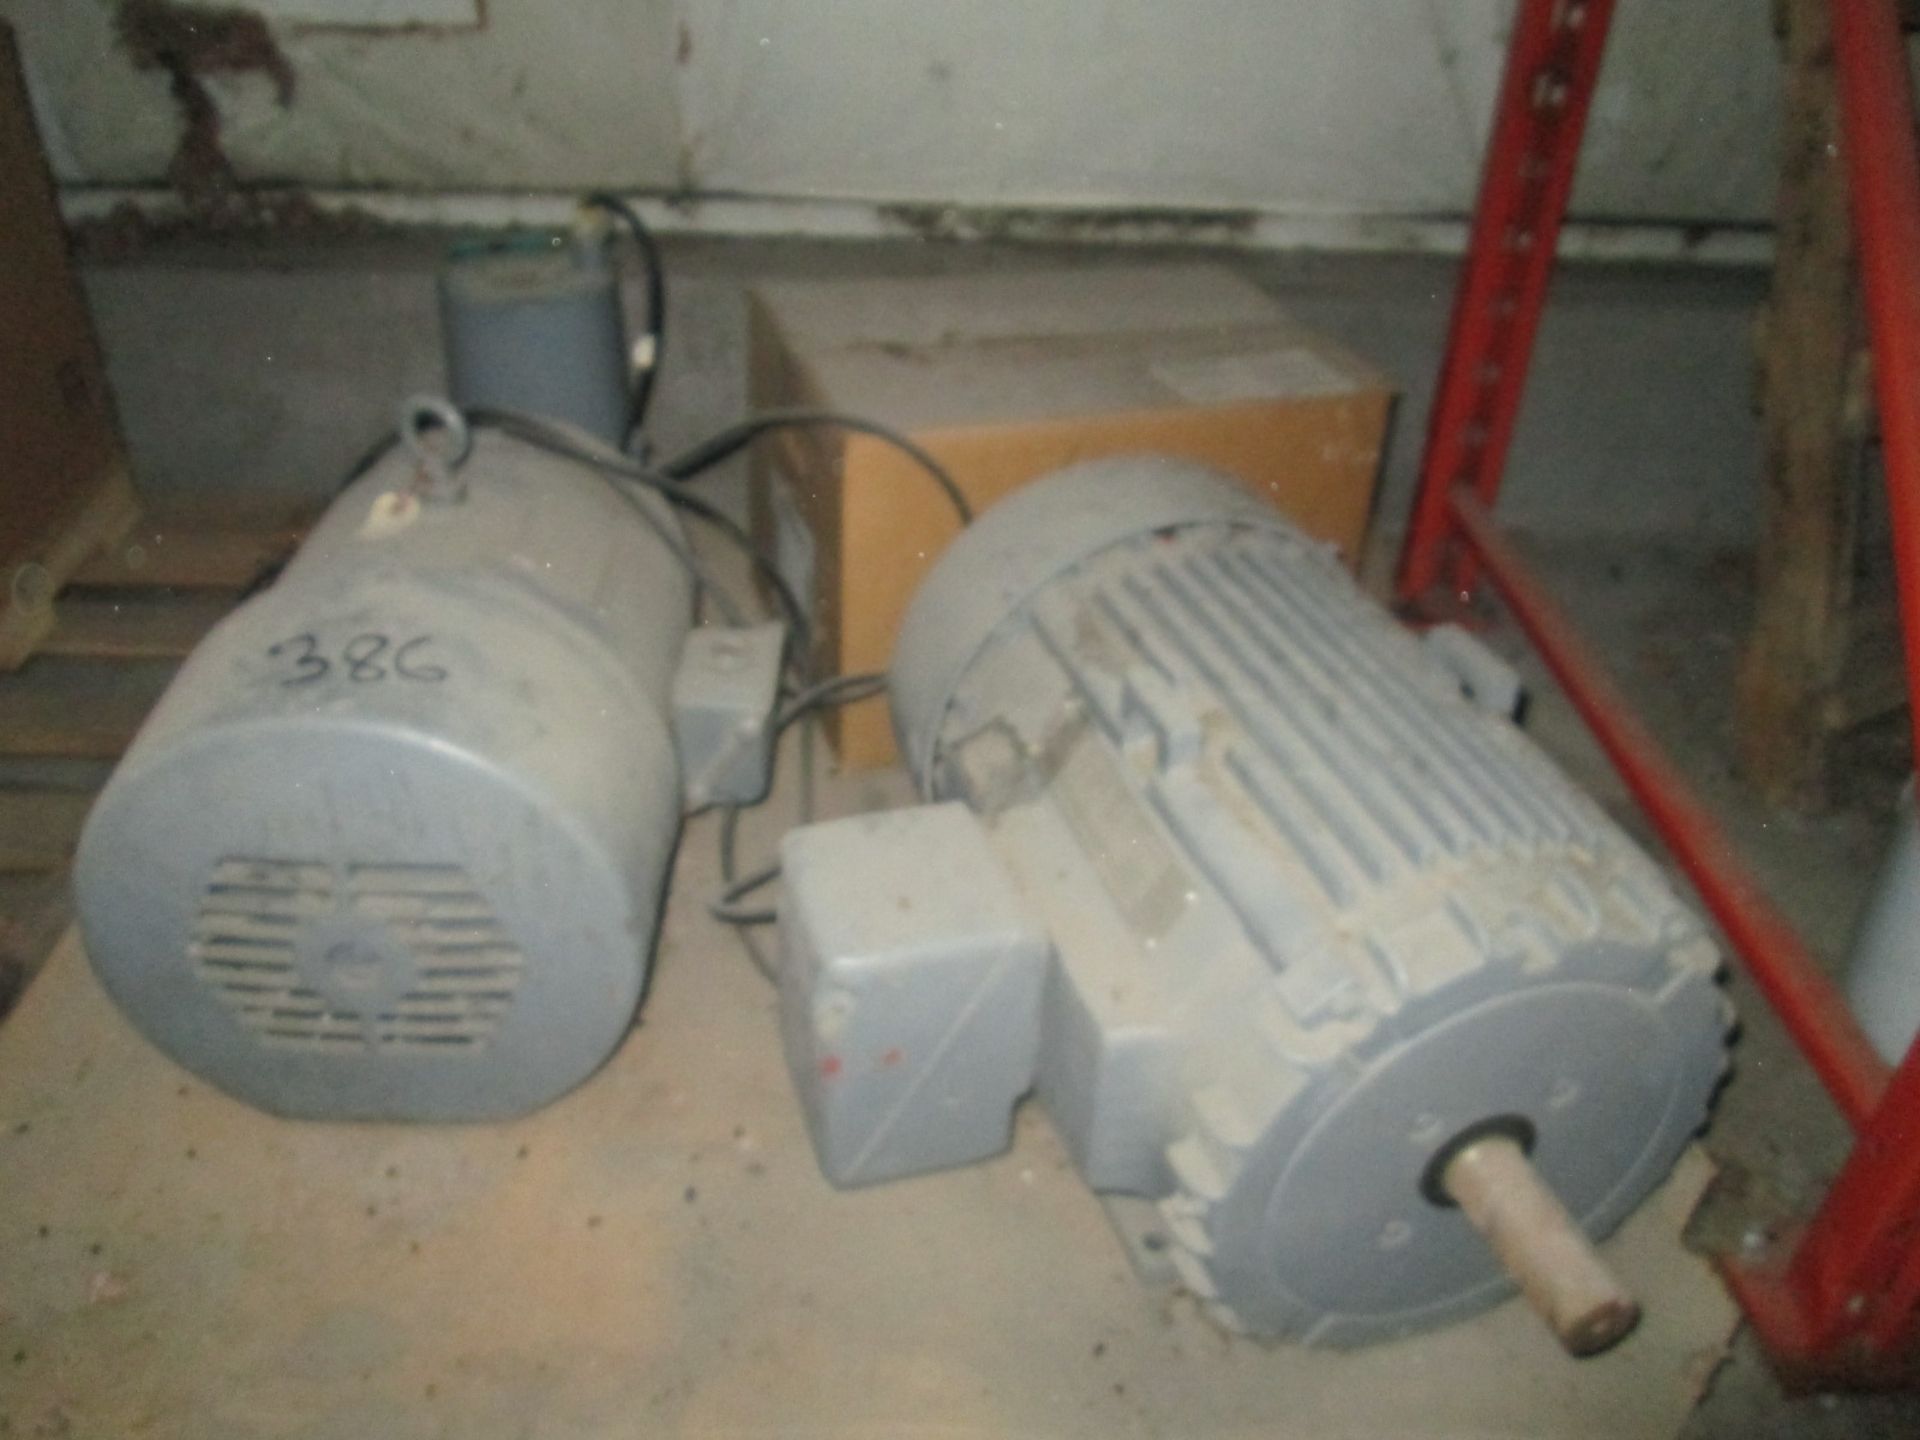 Skid with 3 Electric Motors